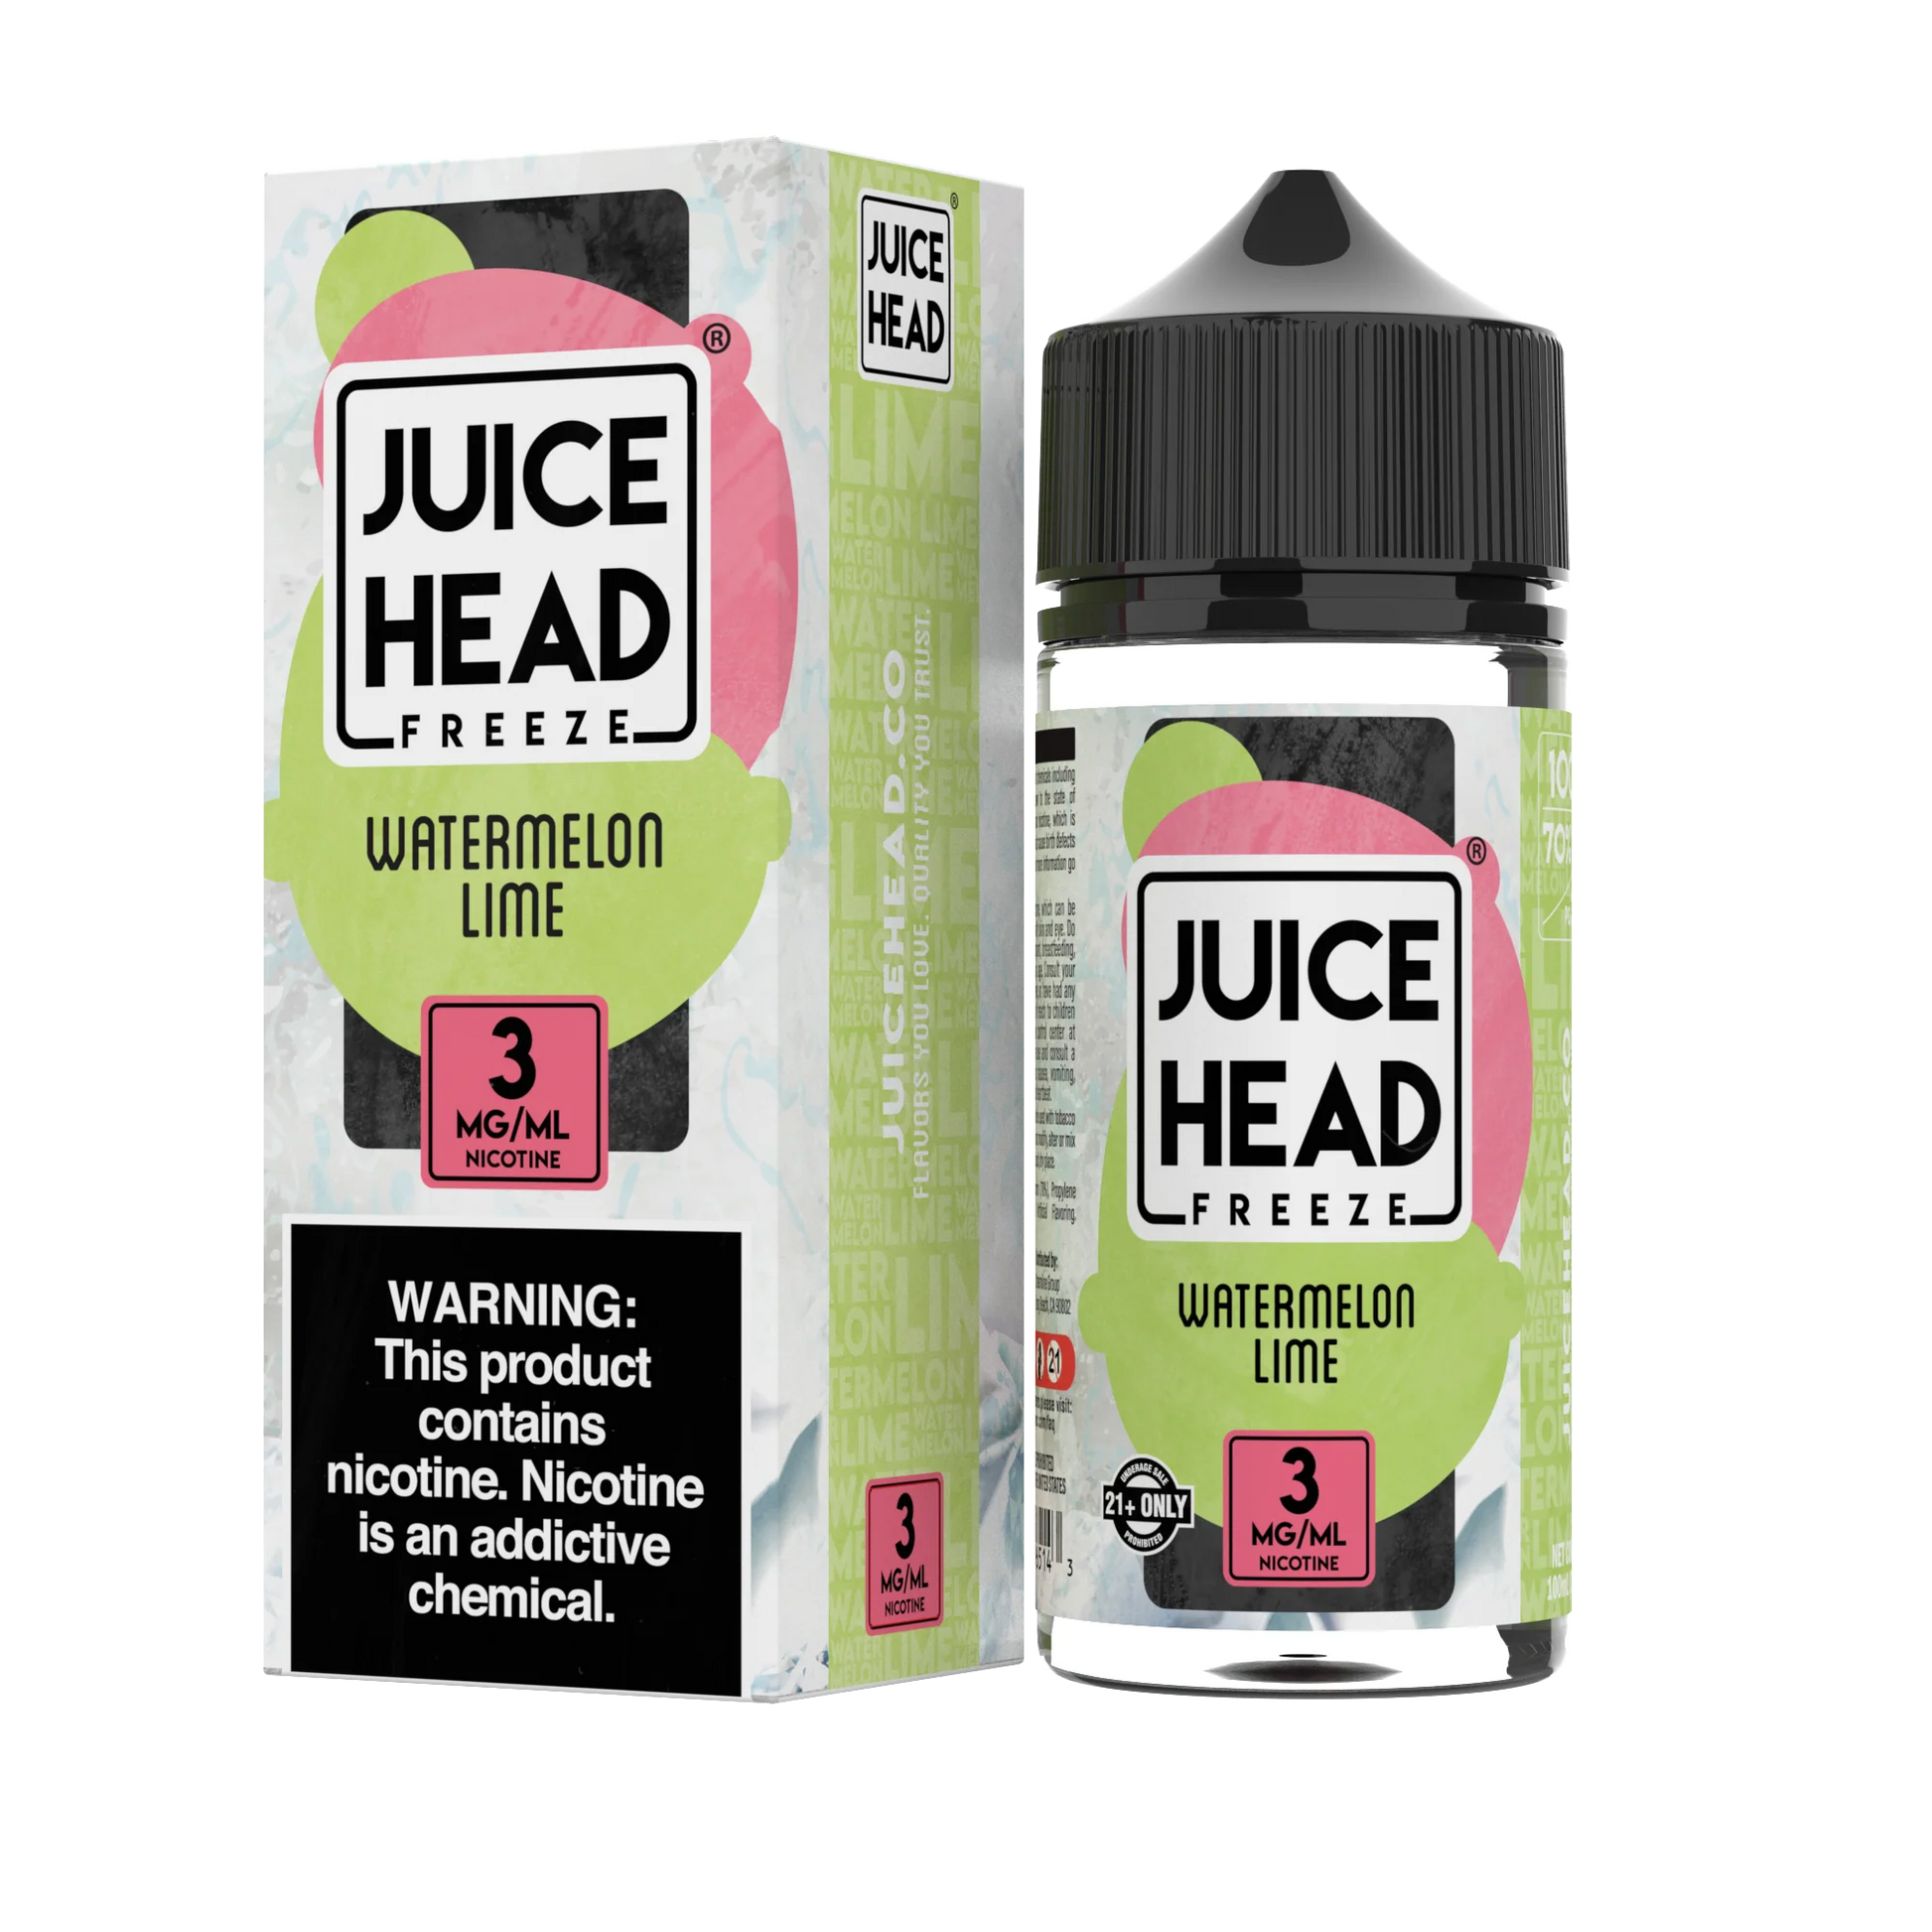 Juice Head 60mL 2PK Freeze Watermelon Lime with Packaging